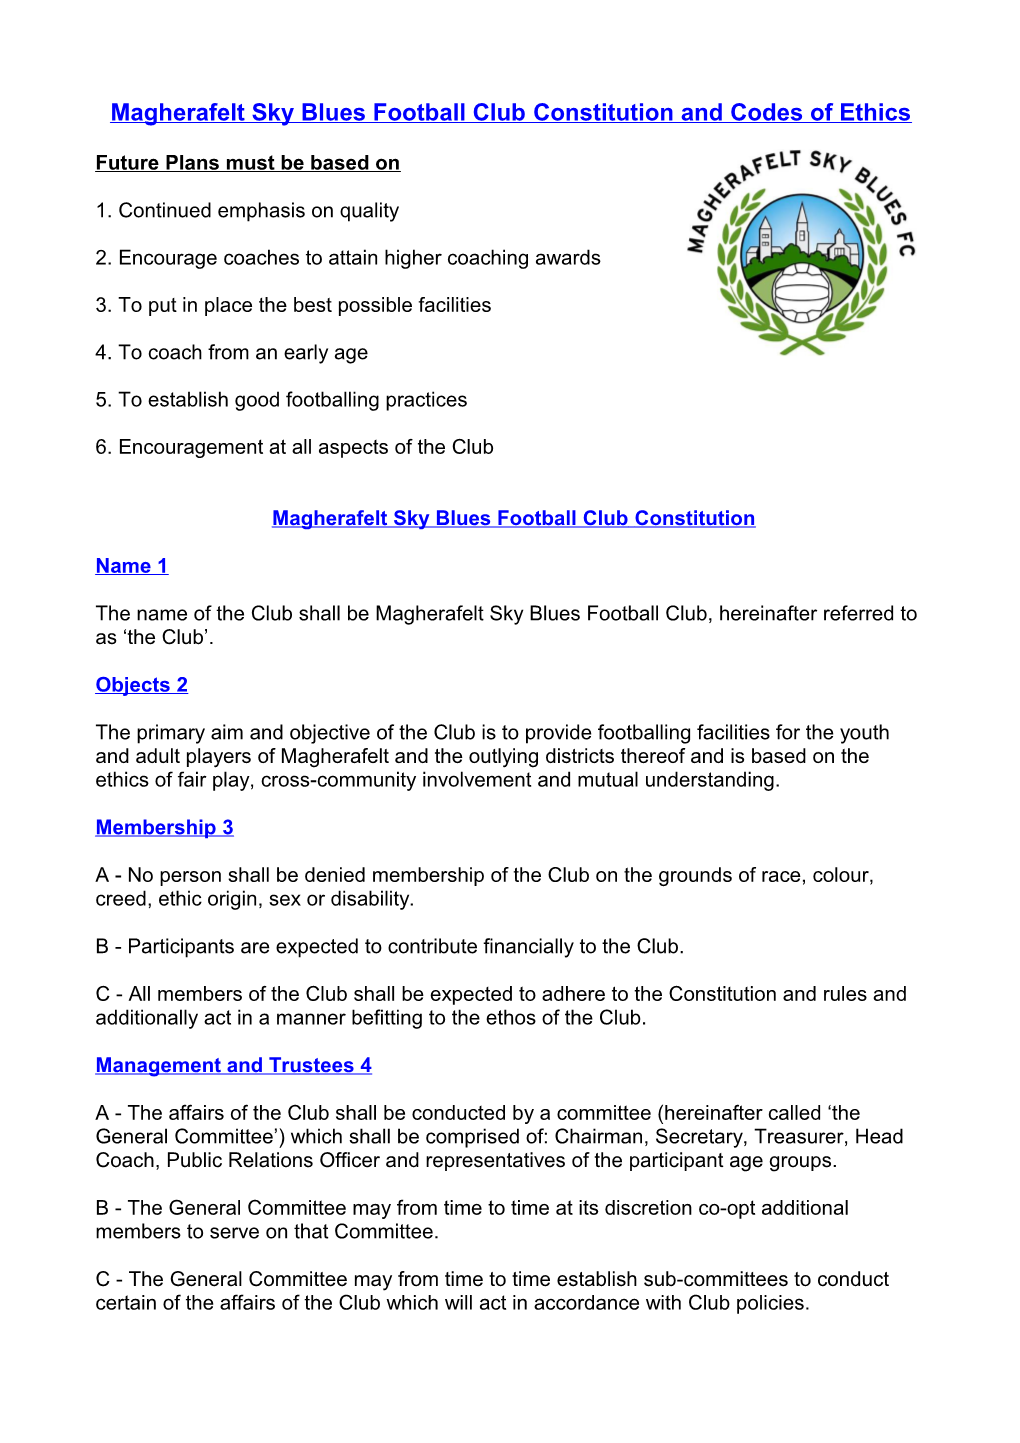 Magherafelt Sky Blues Football Club Constitution and Codes of Ethics